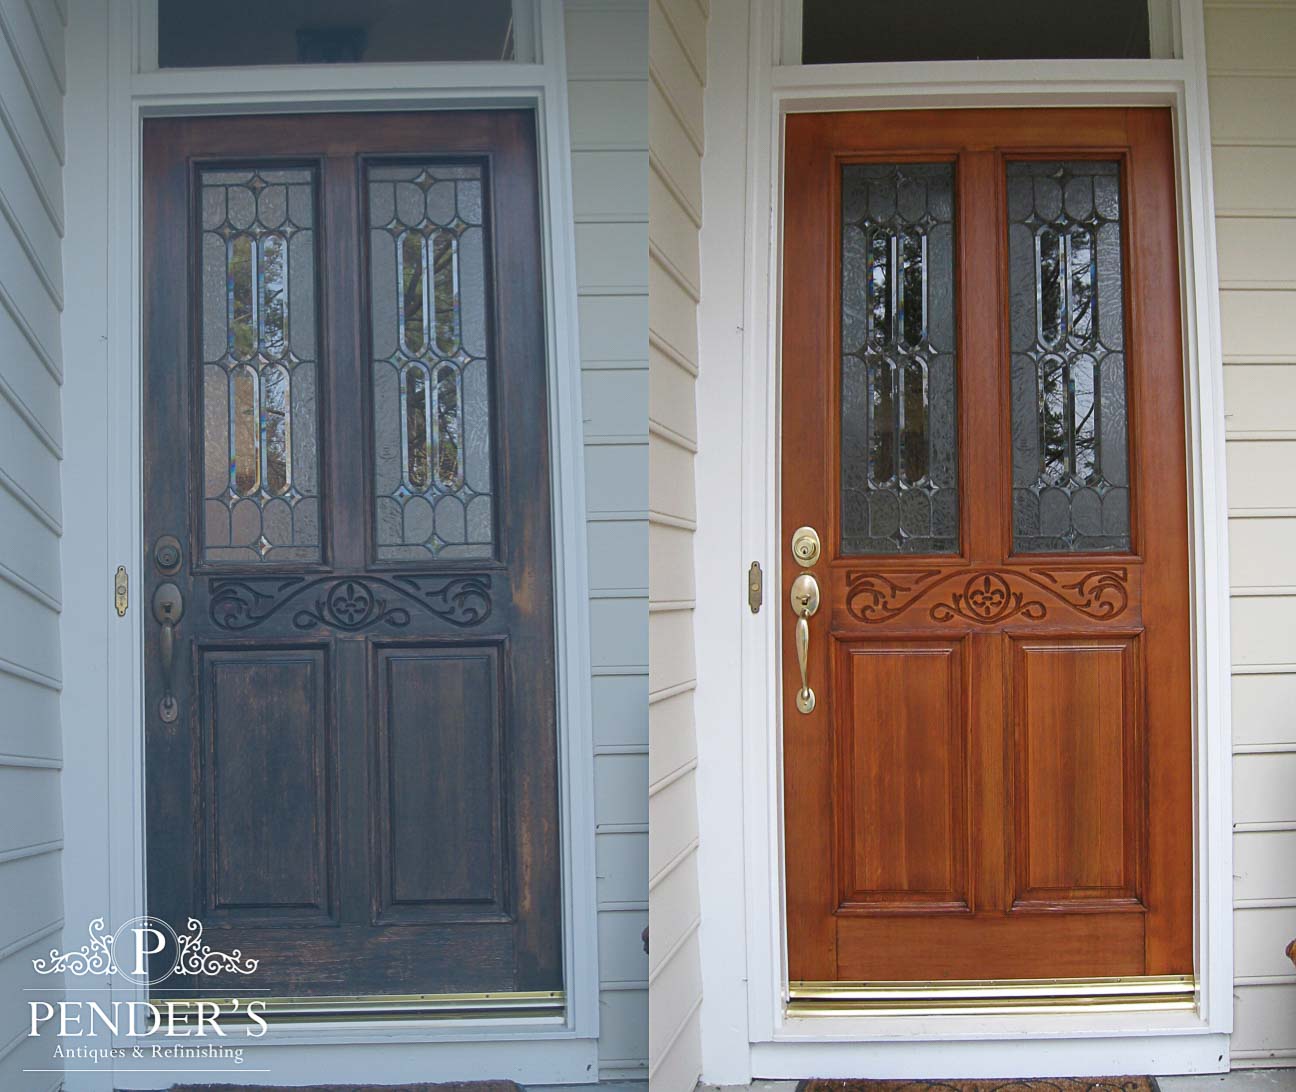 Before and after restoration of a weather worn wooden front door